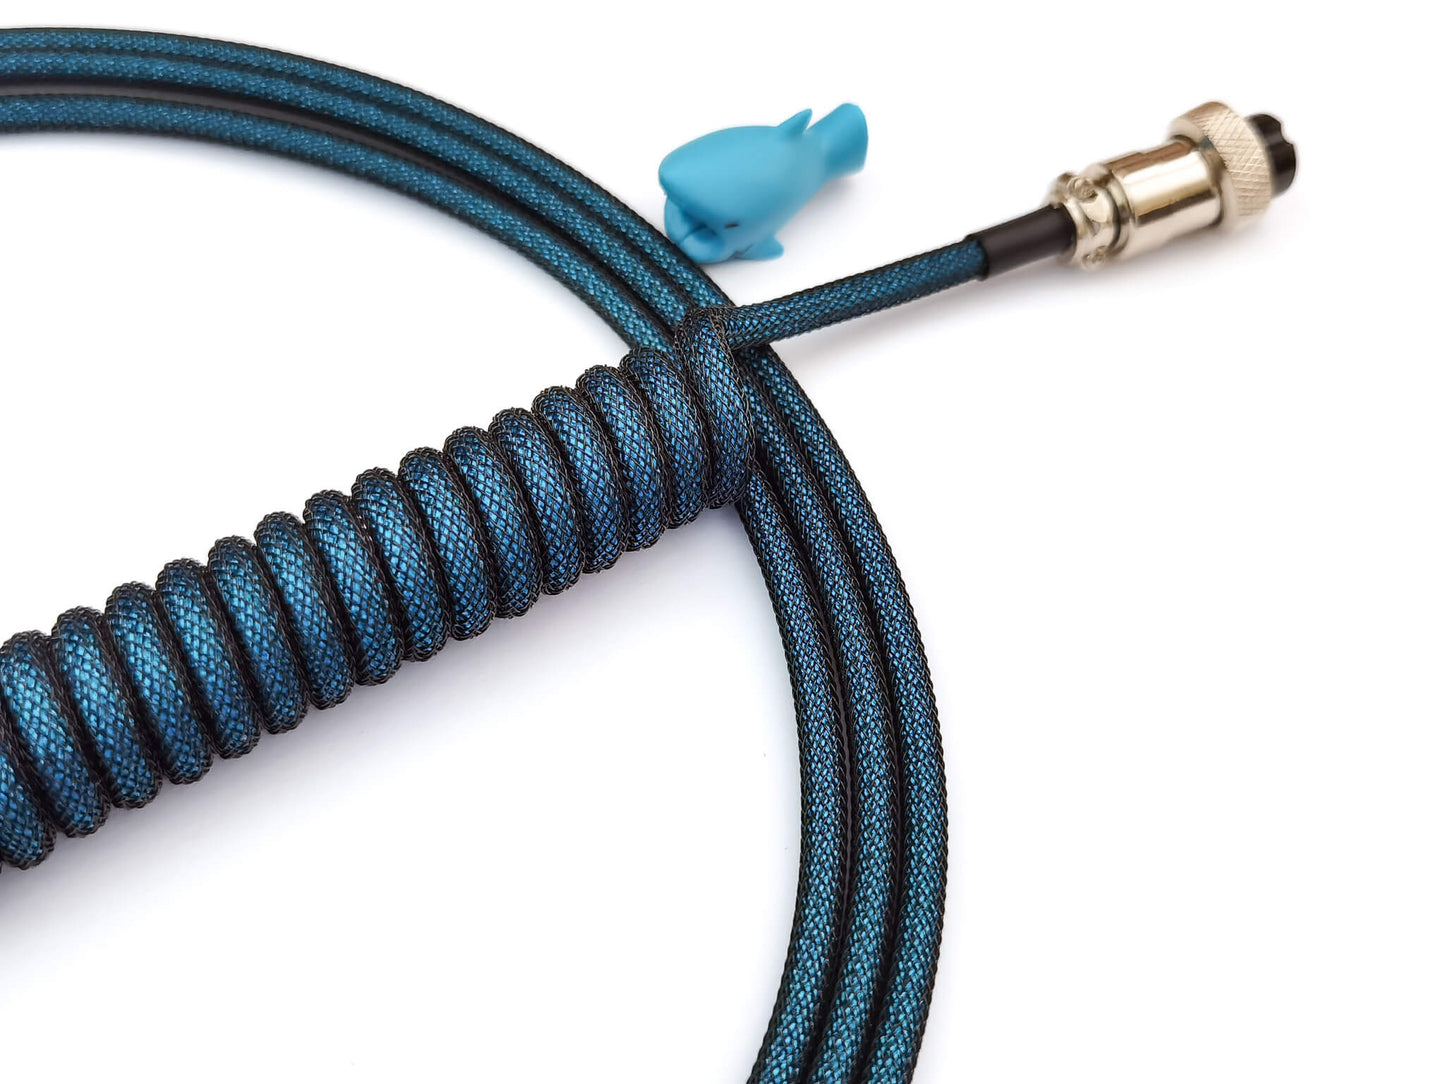 Blue coiled cable